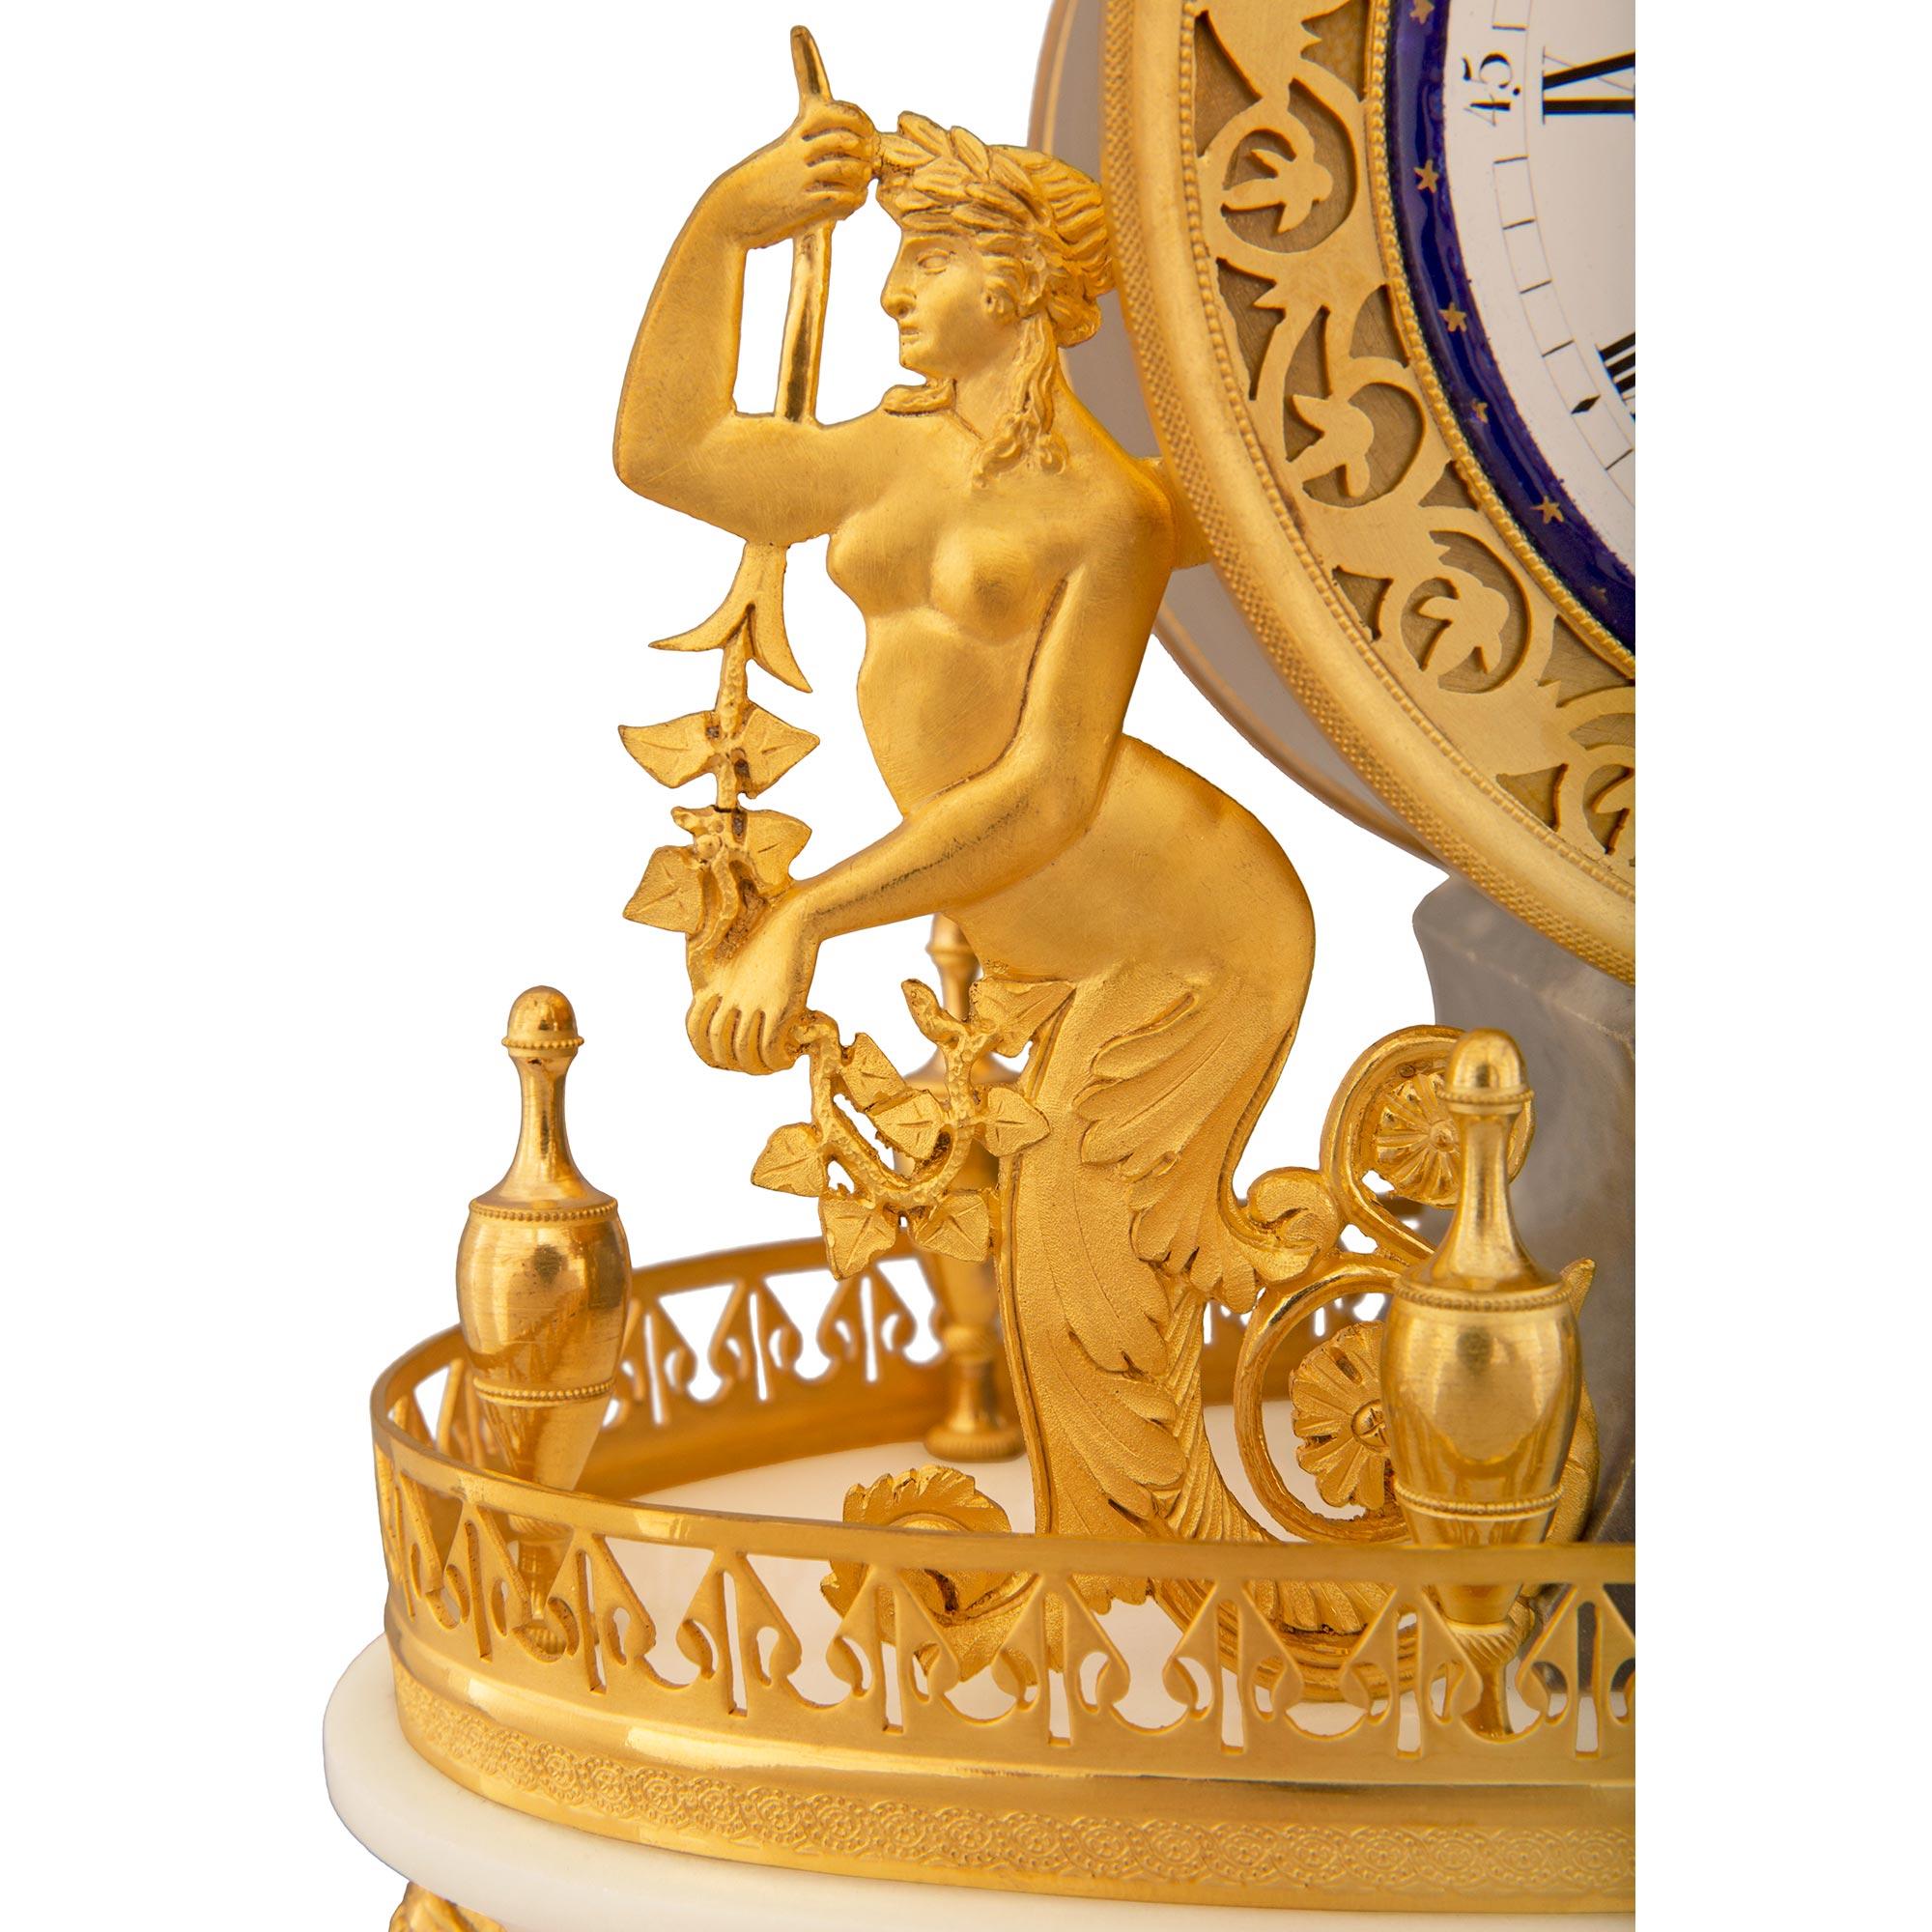 French 19th century Empire st. Gris st. Anne, Carrara marble, and Ormolu clock For Sale 4